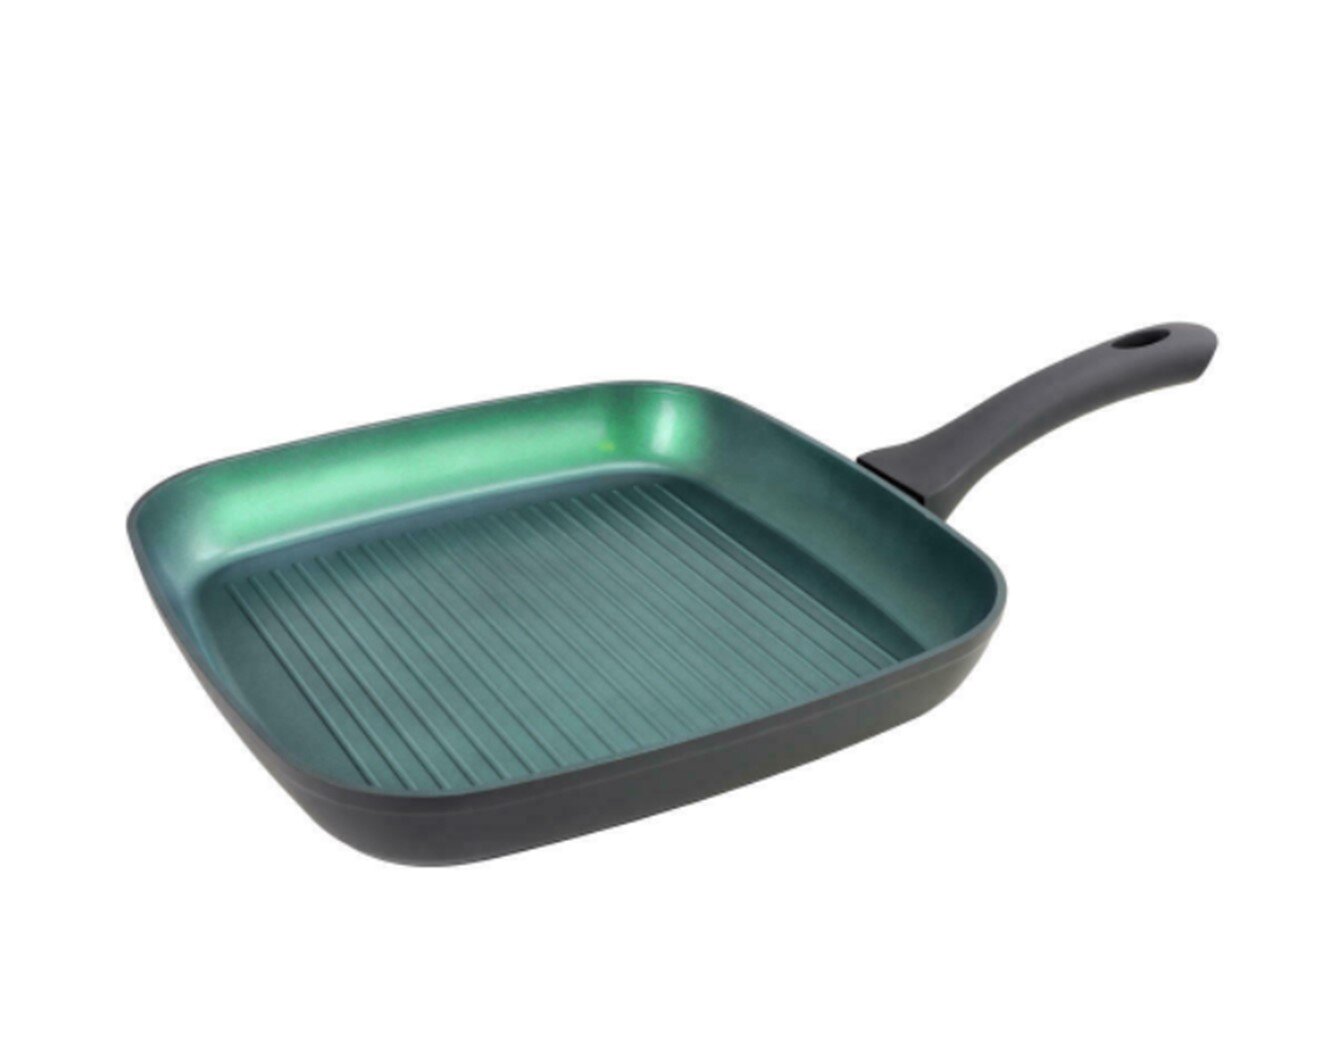 11.46'' Non-Stick Enameled Cast Iron Grill Pan